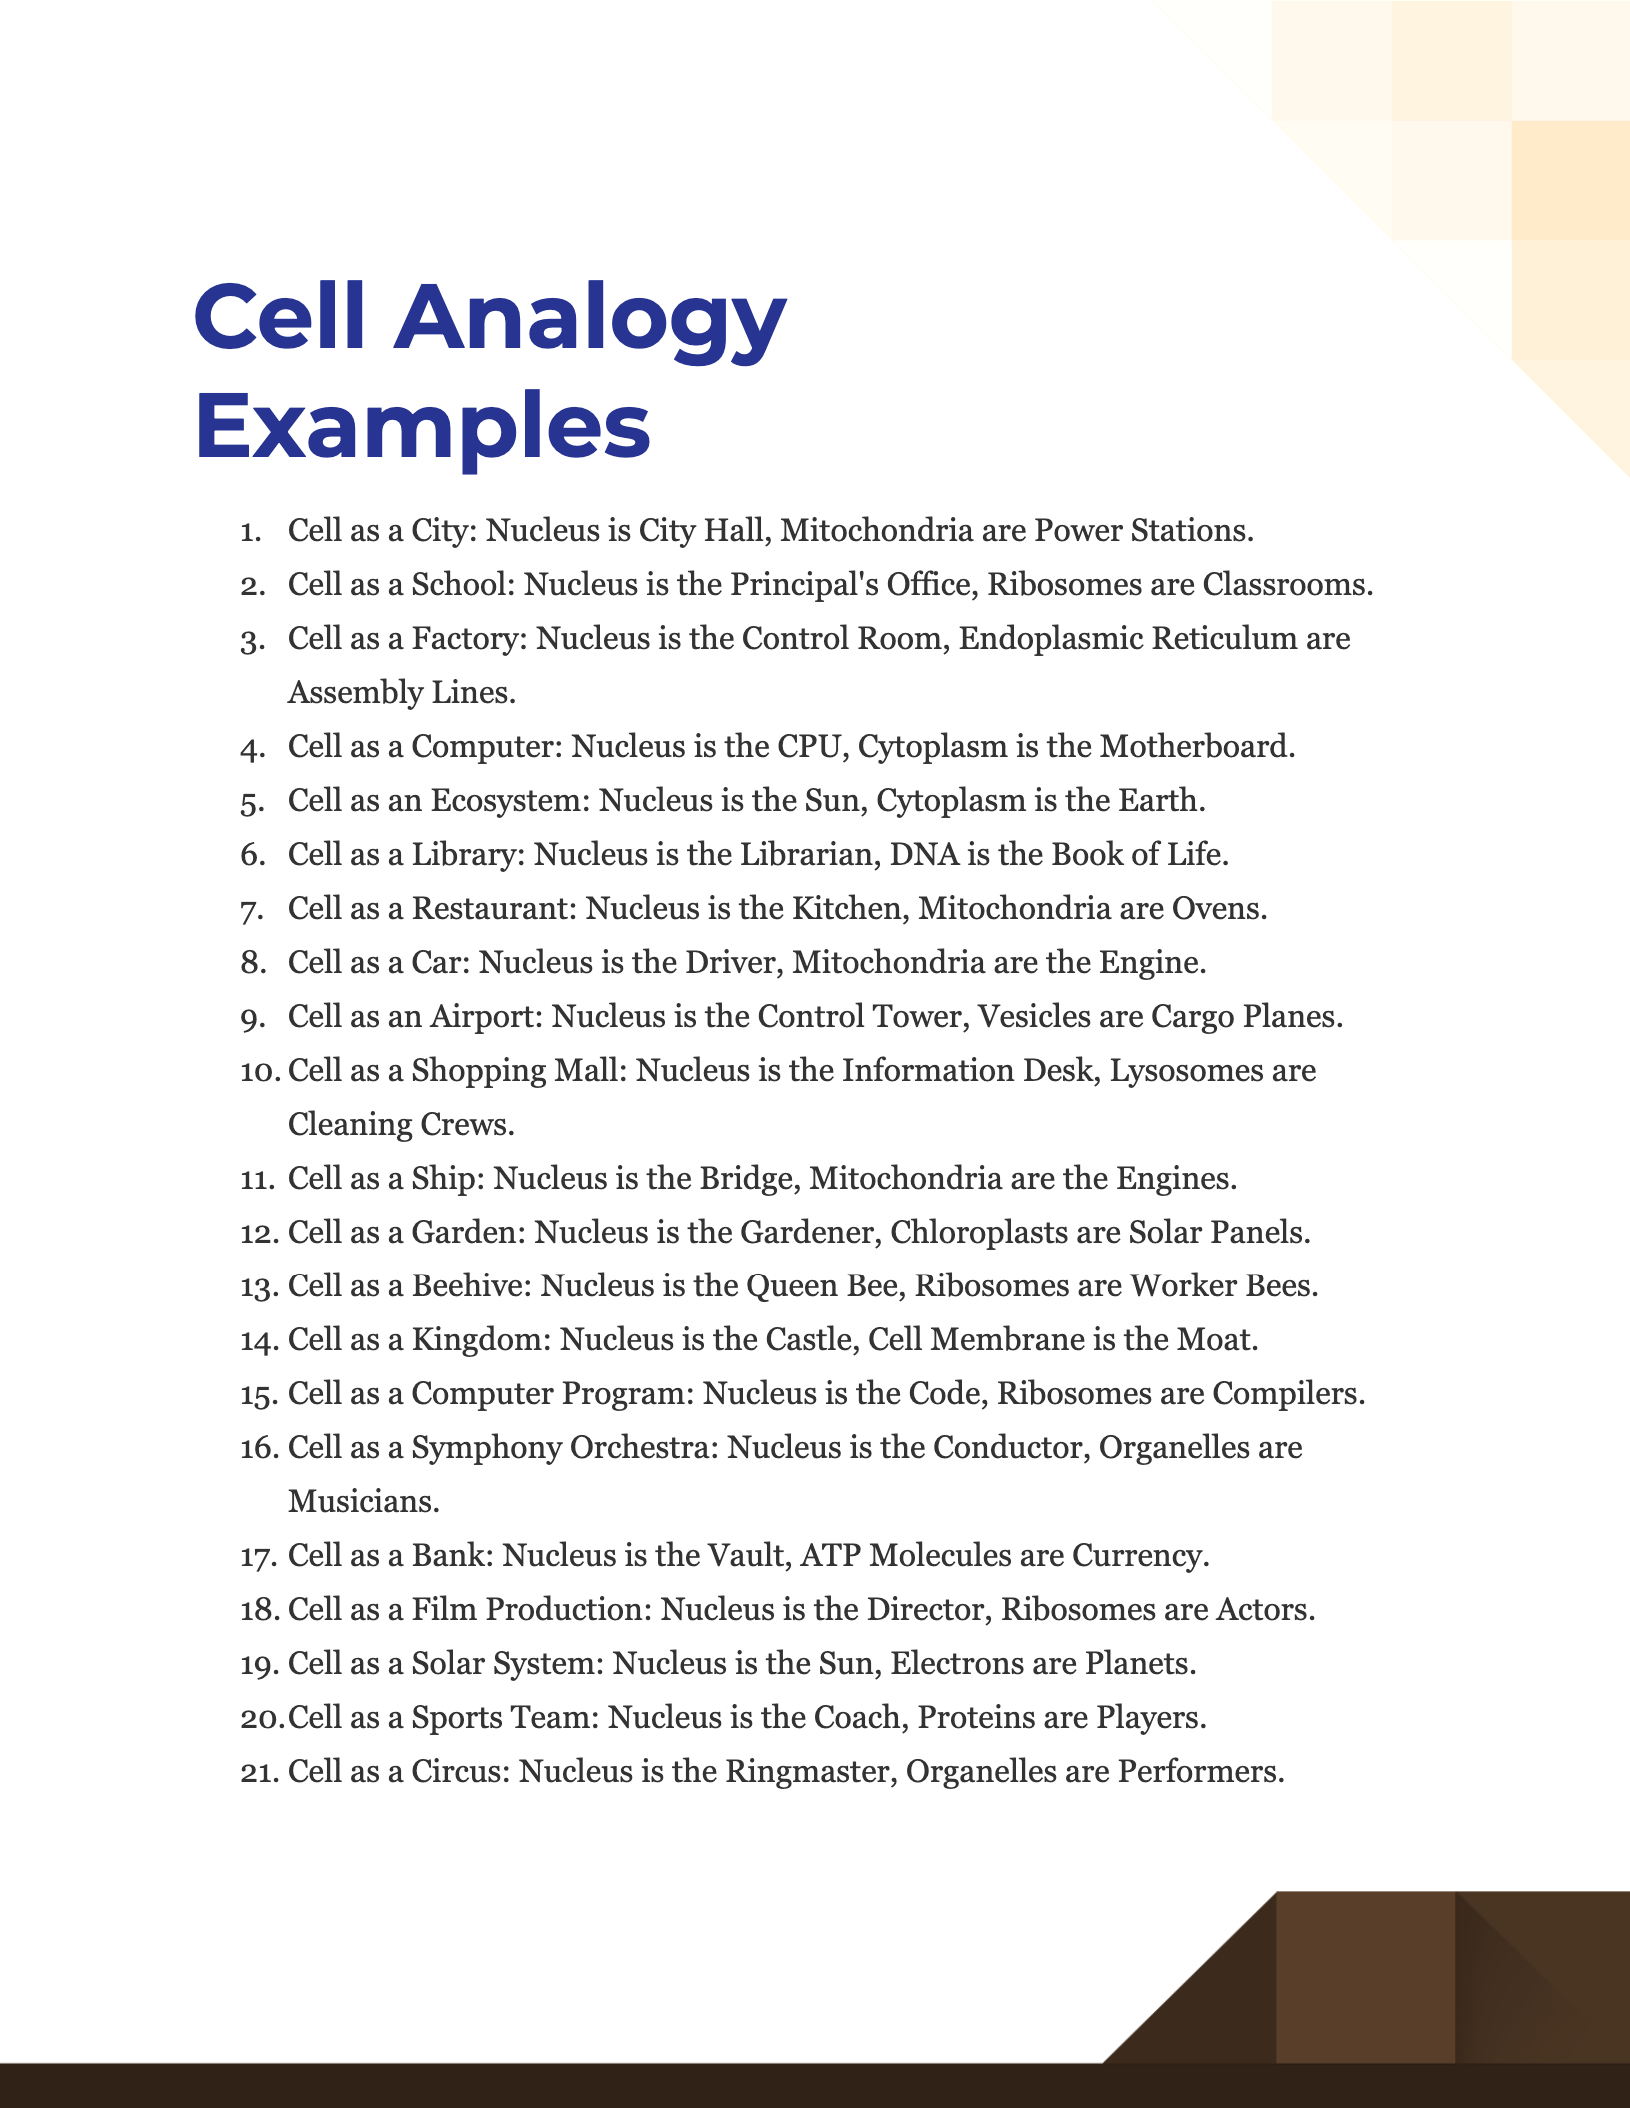 Cell Analogy Examples